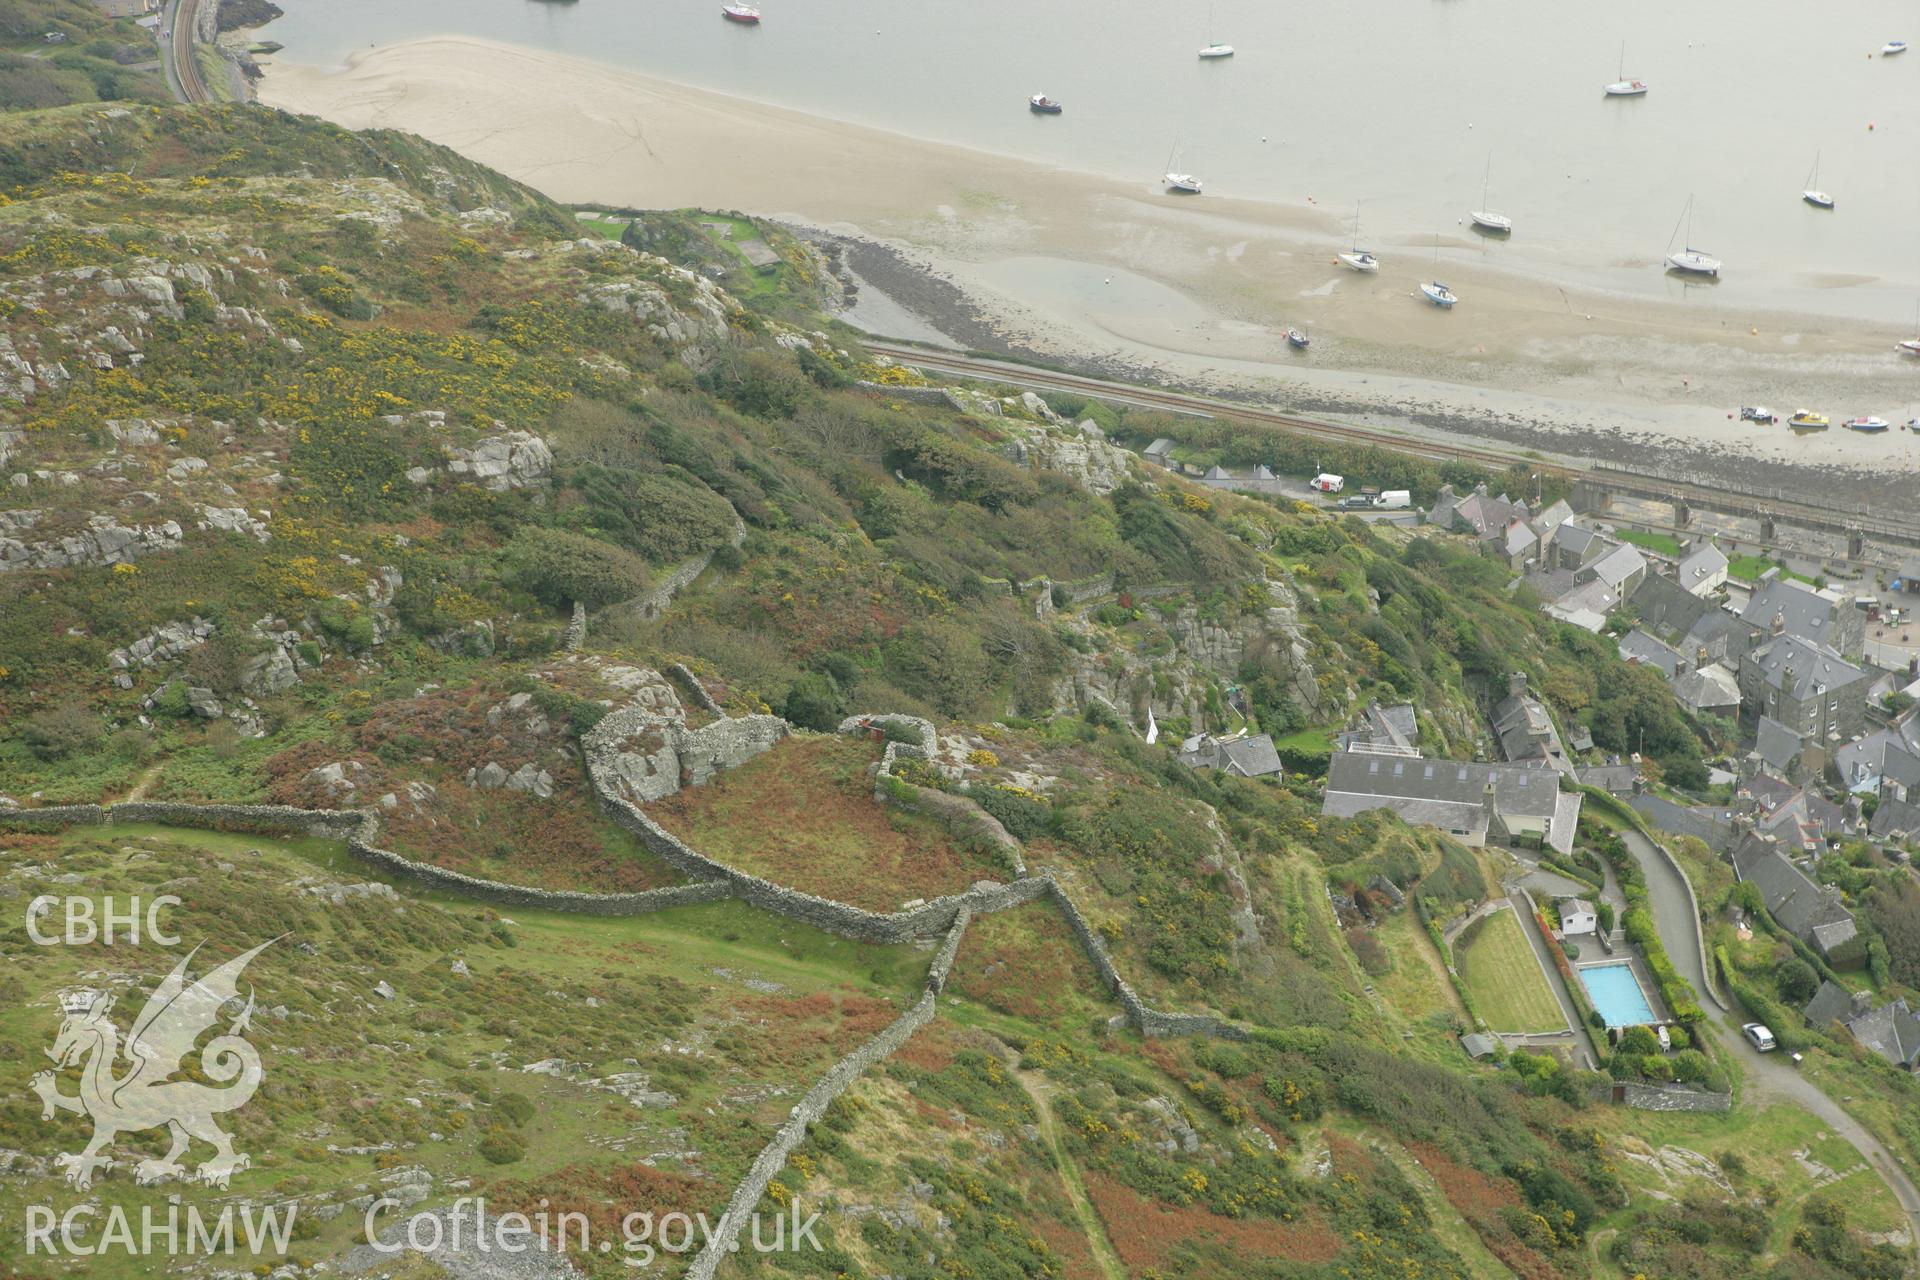 RCAHMW colour oblique photograph of Barmouth;Abermaw, view from the North. Taken by Toby Driver on 08/10/2007.